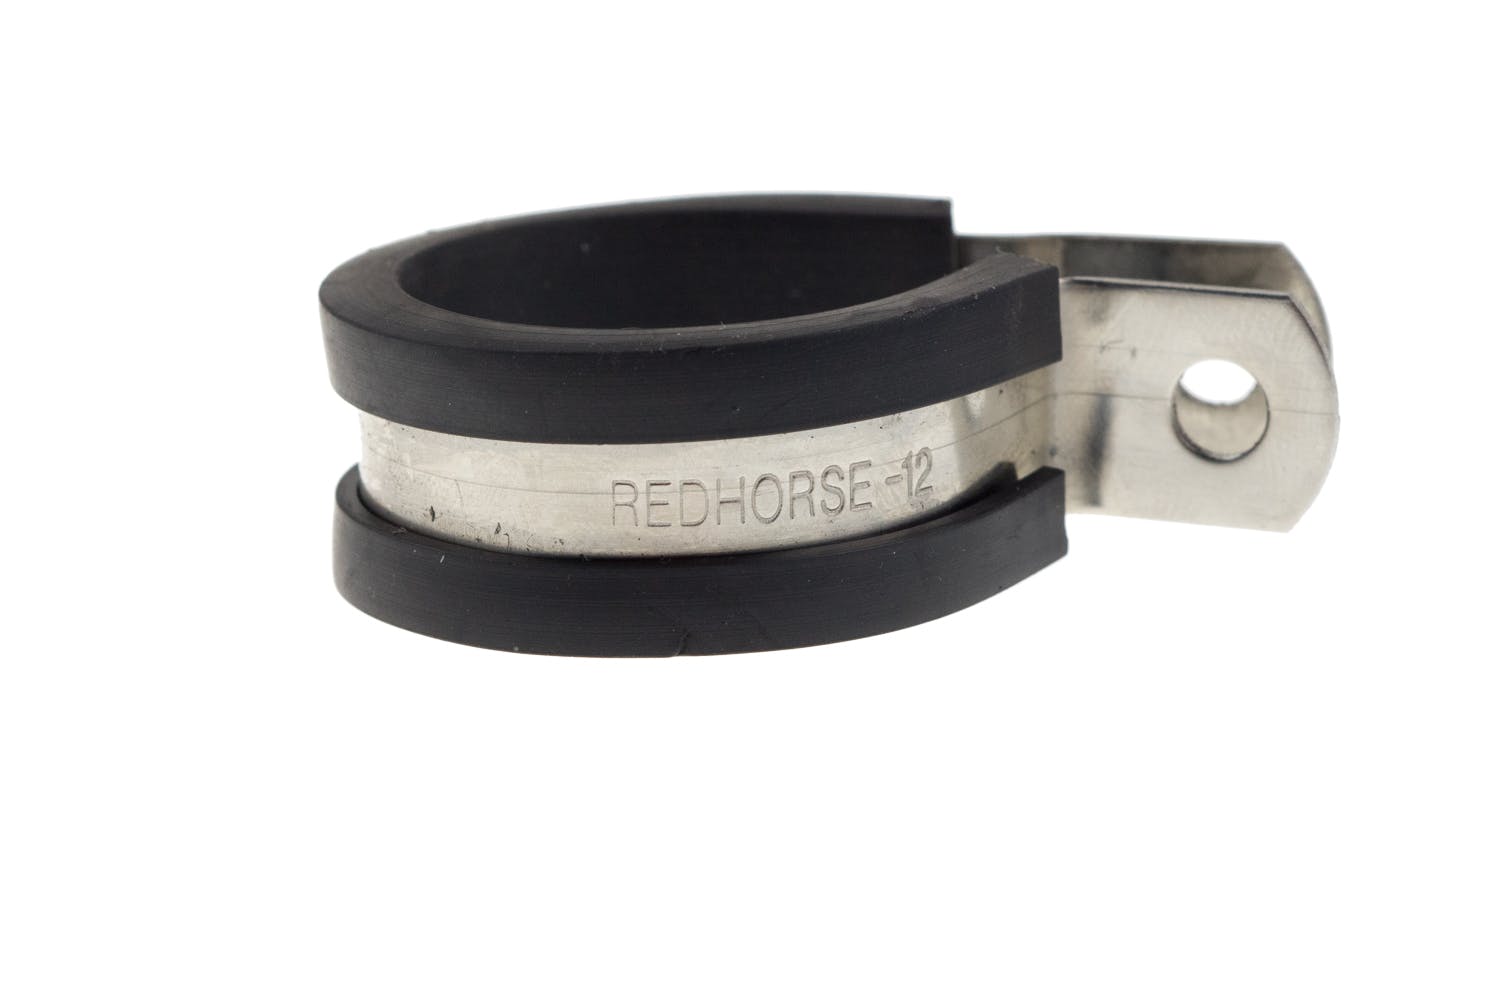 Redhorse Performance 220-12-2 -12 Cushioned Hose Clamp 10pcs/Package.